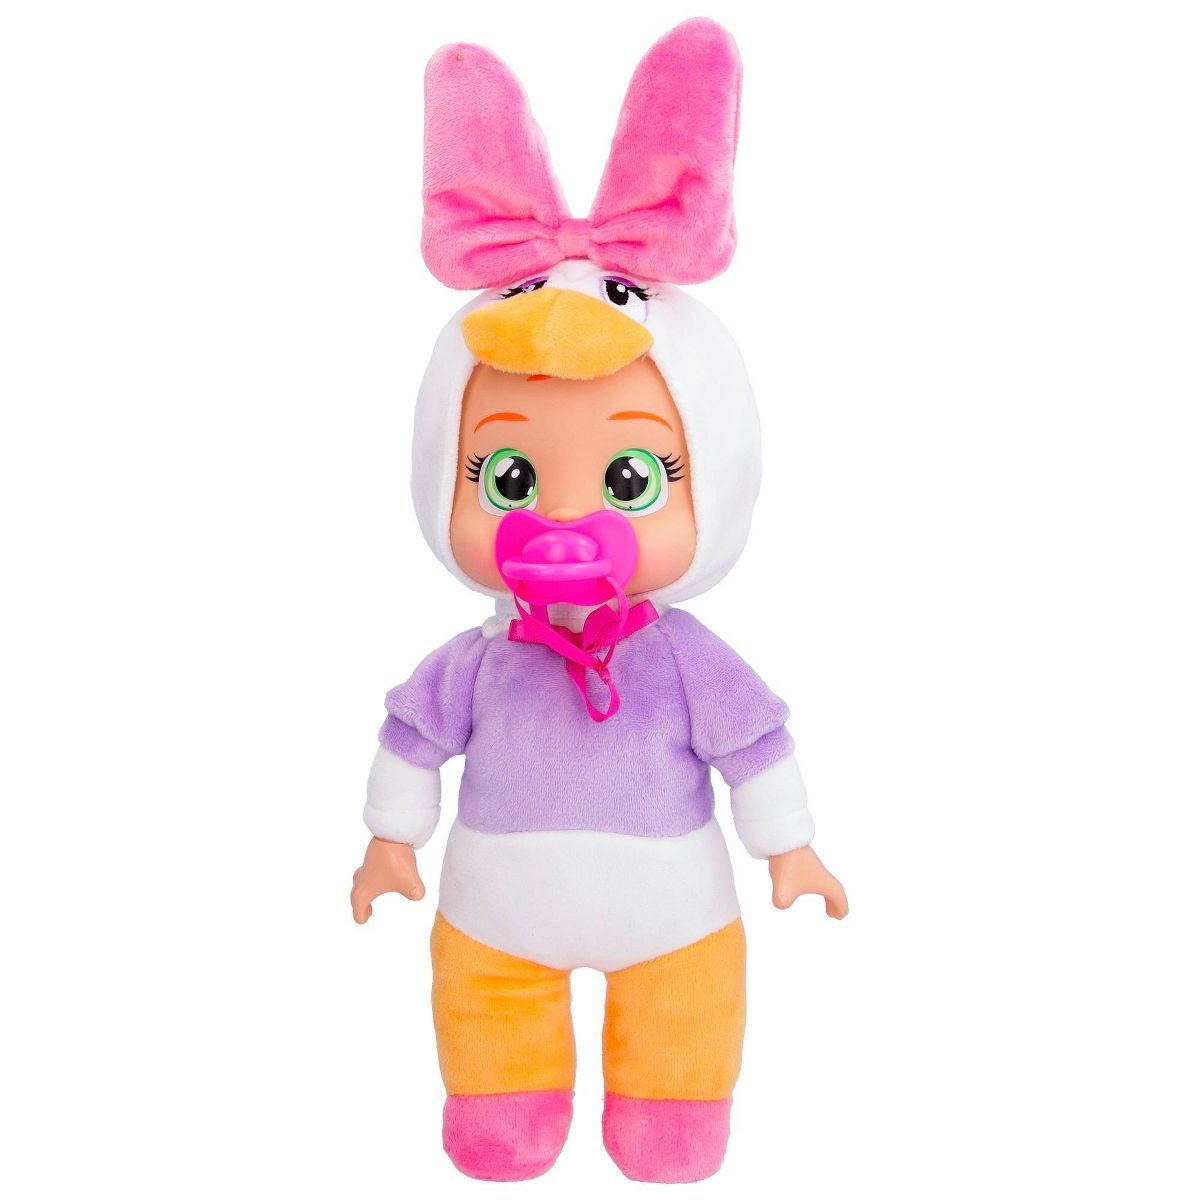 Cry Babies Disney 9" Plush Baby Doll Tiny Cuddles Inspired By Disney Daisy That Cry Real Tears | Target